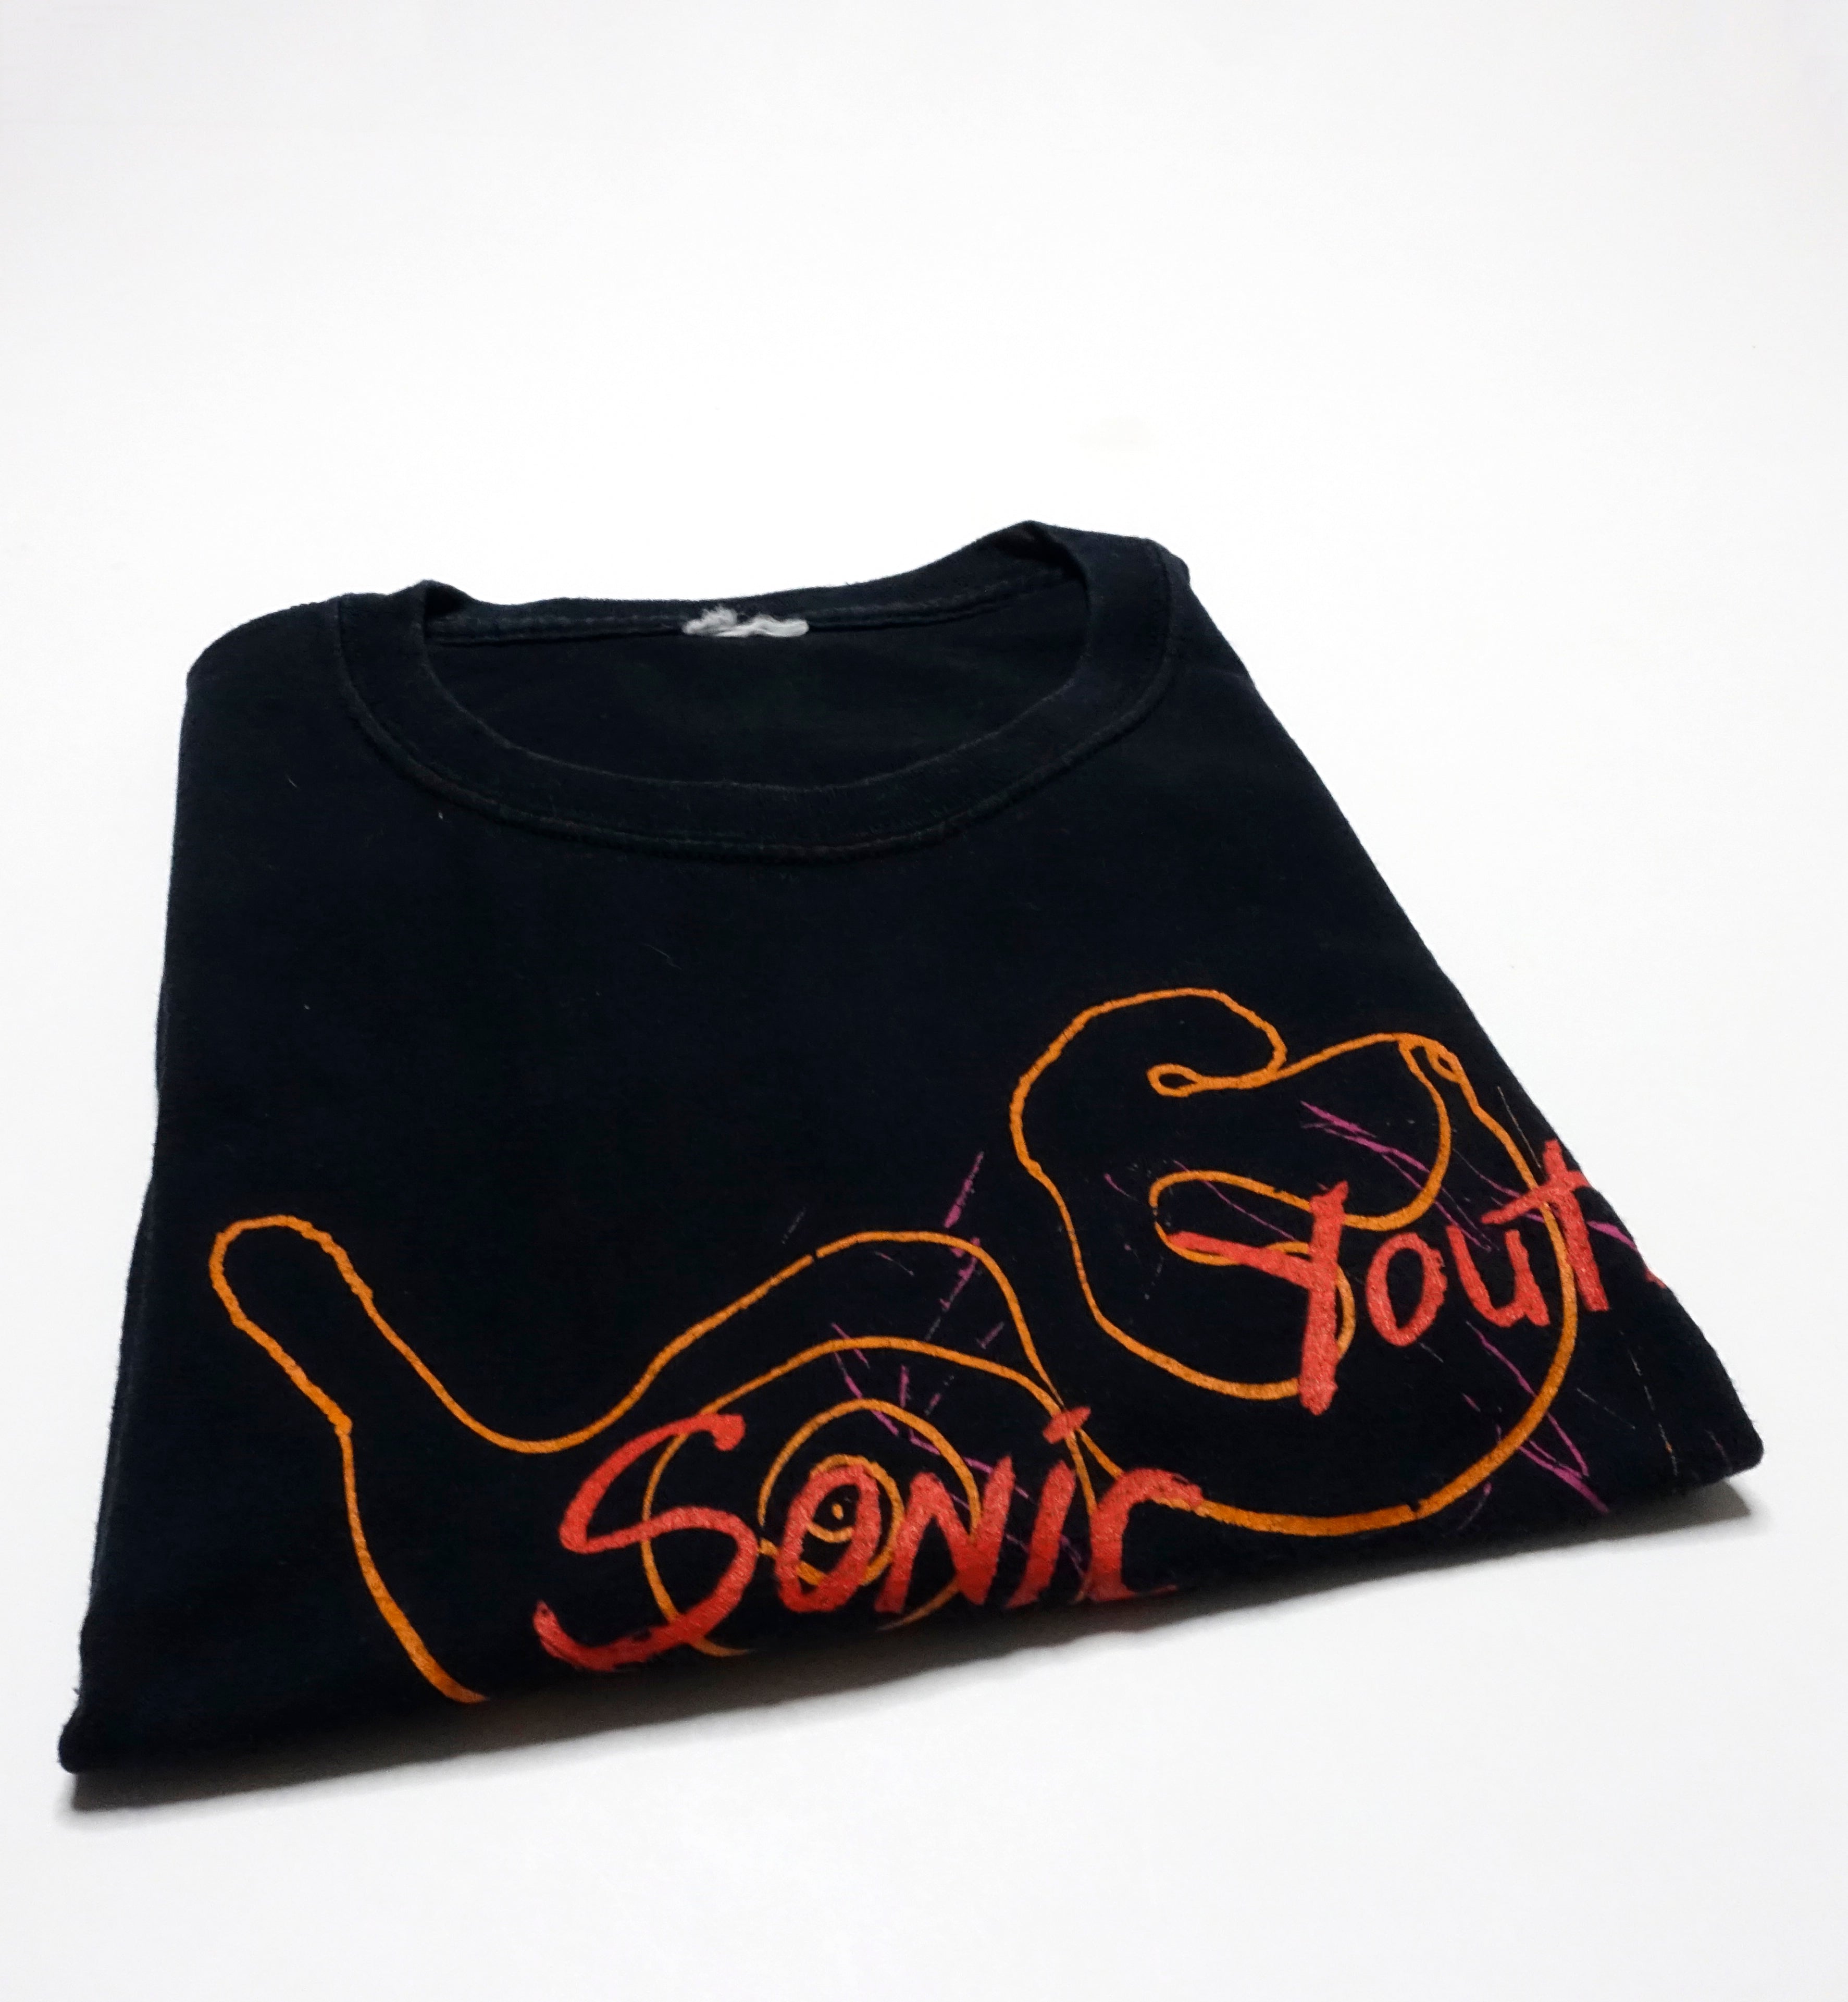 Sonic Youth - Evol late 90's Tour Shirt Size Large